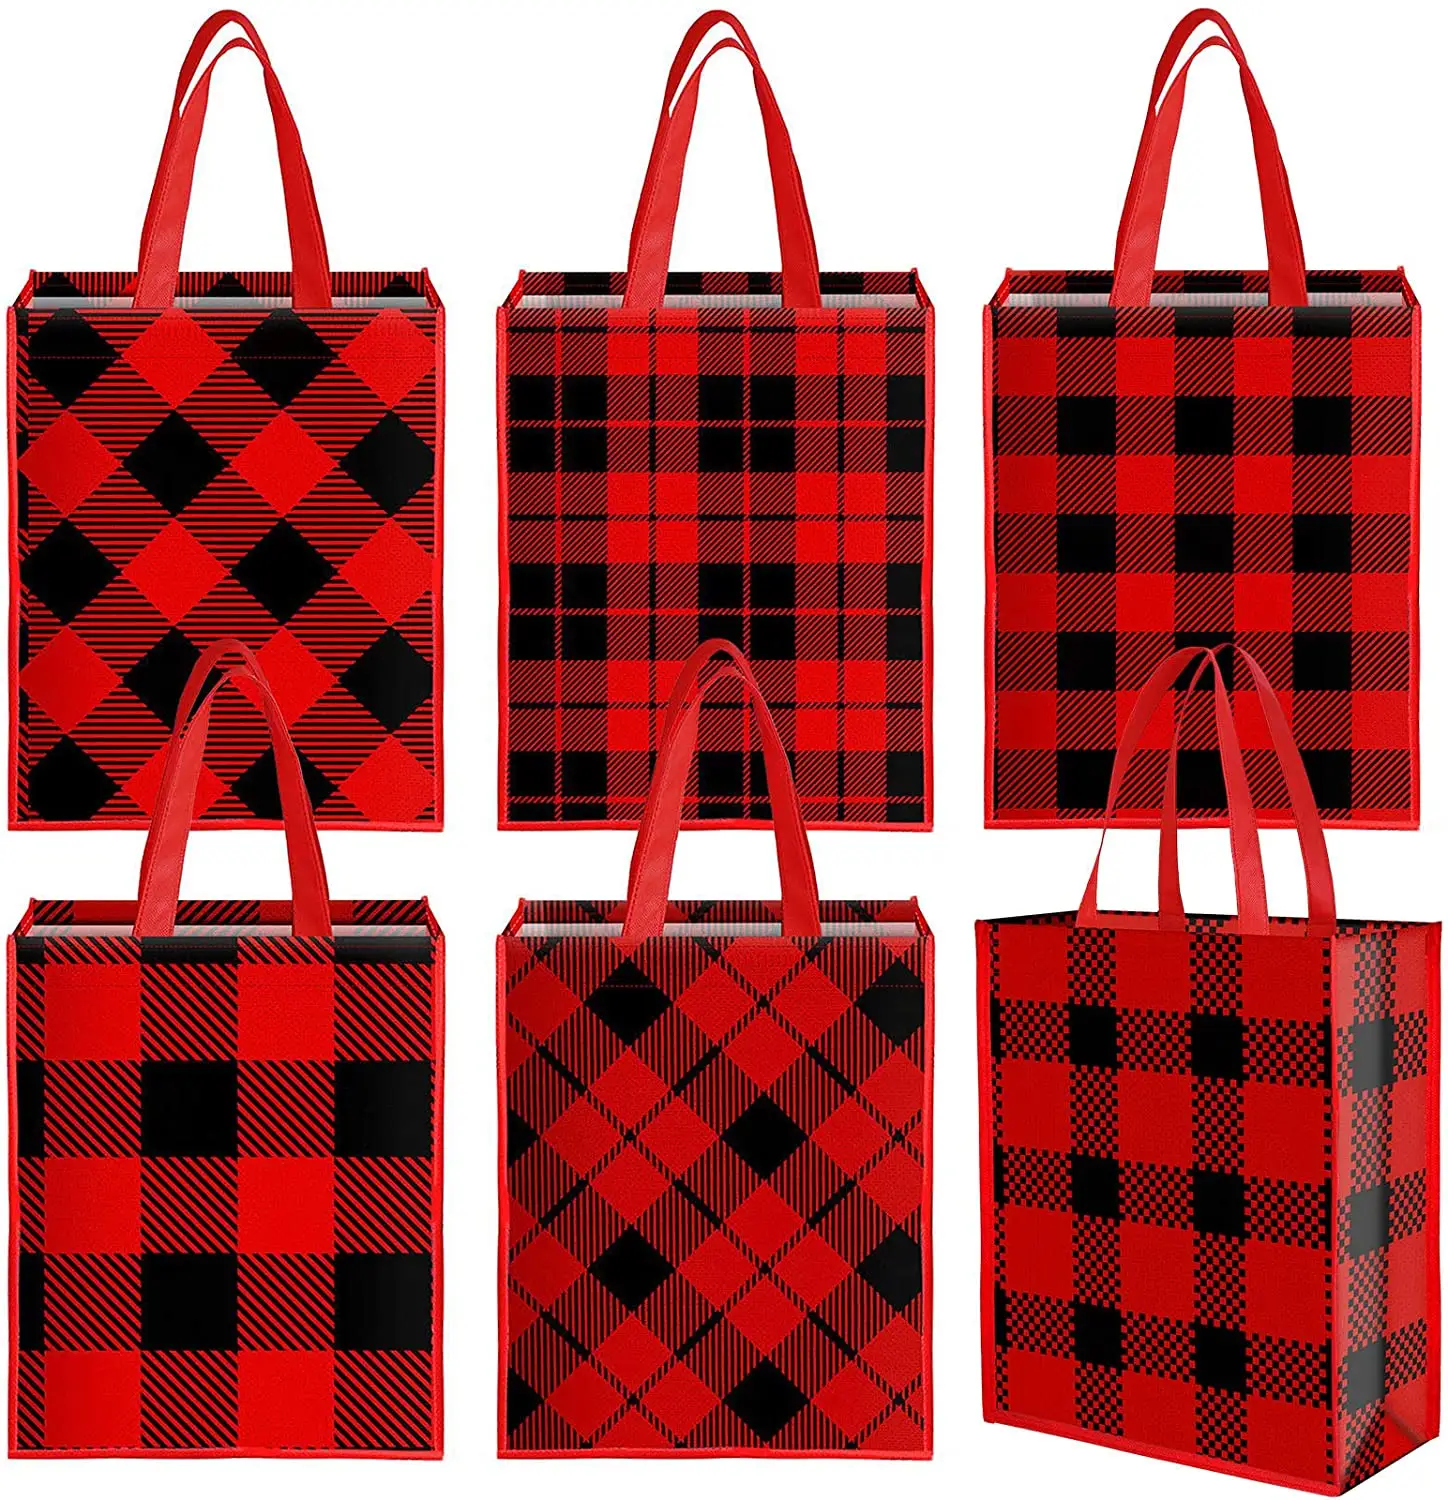 Ruthbag Red and Black Plaid Bags Easter Non-Woven Treat Bags Valentine's Day Candy Gift Tote Bags for Christmas Party Supplies